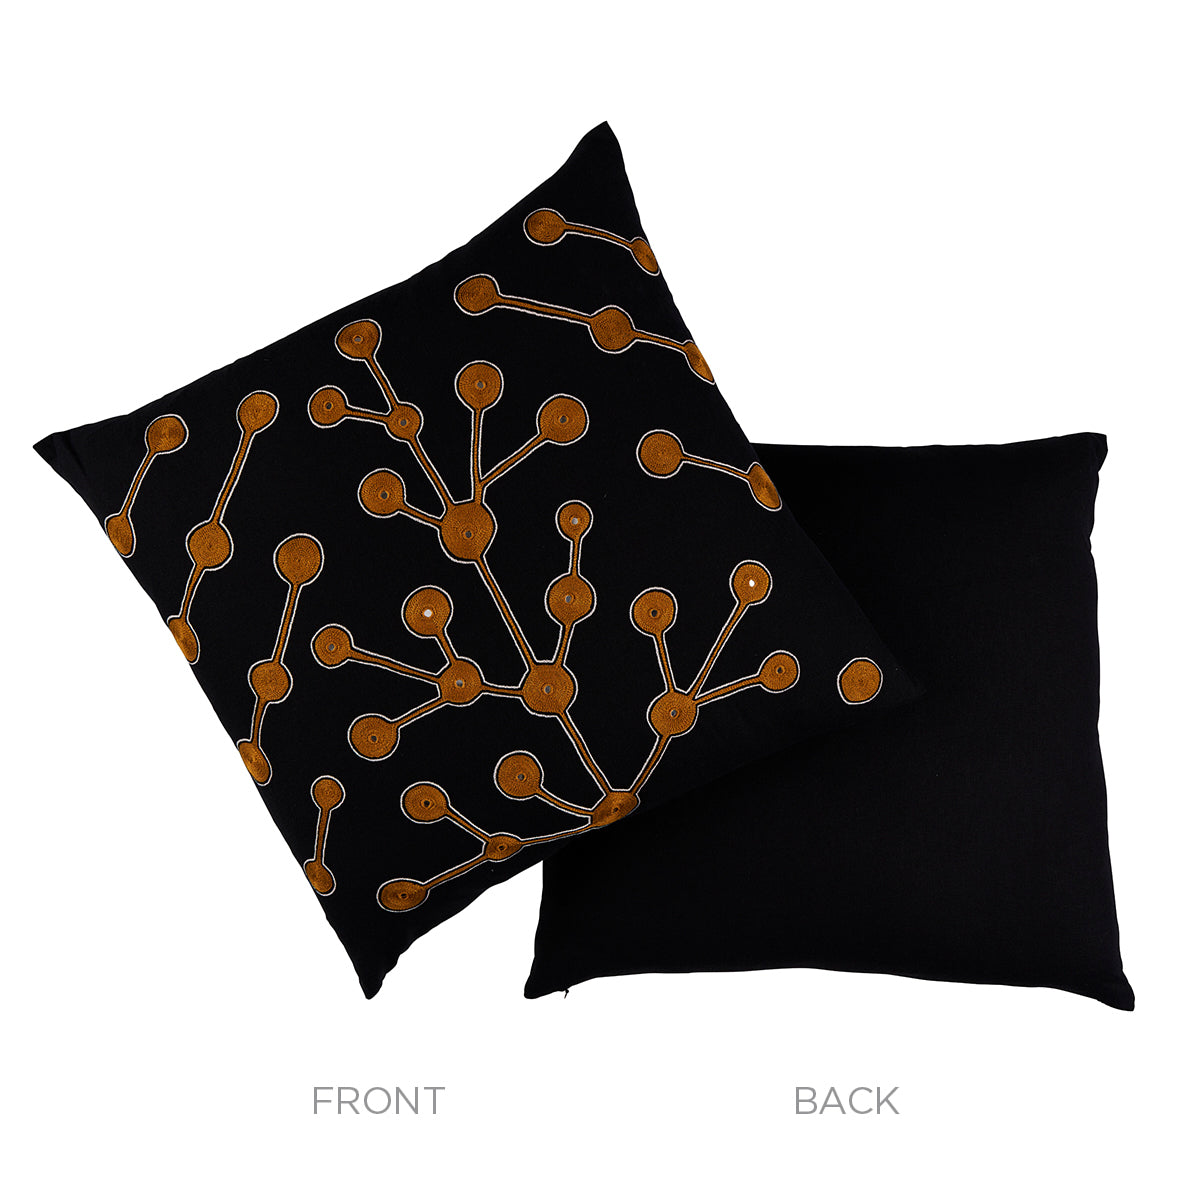 Purchase So0001505 | Tree Of Life Pillow, Black & Beige - Schumacher Pillows